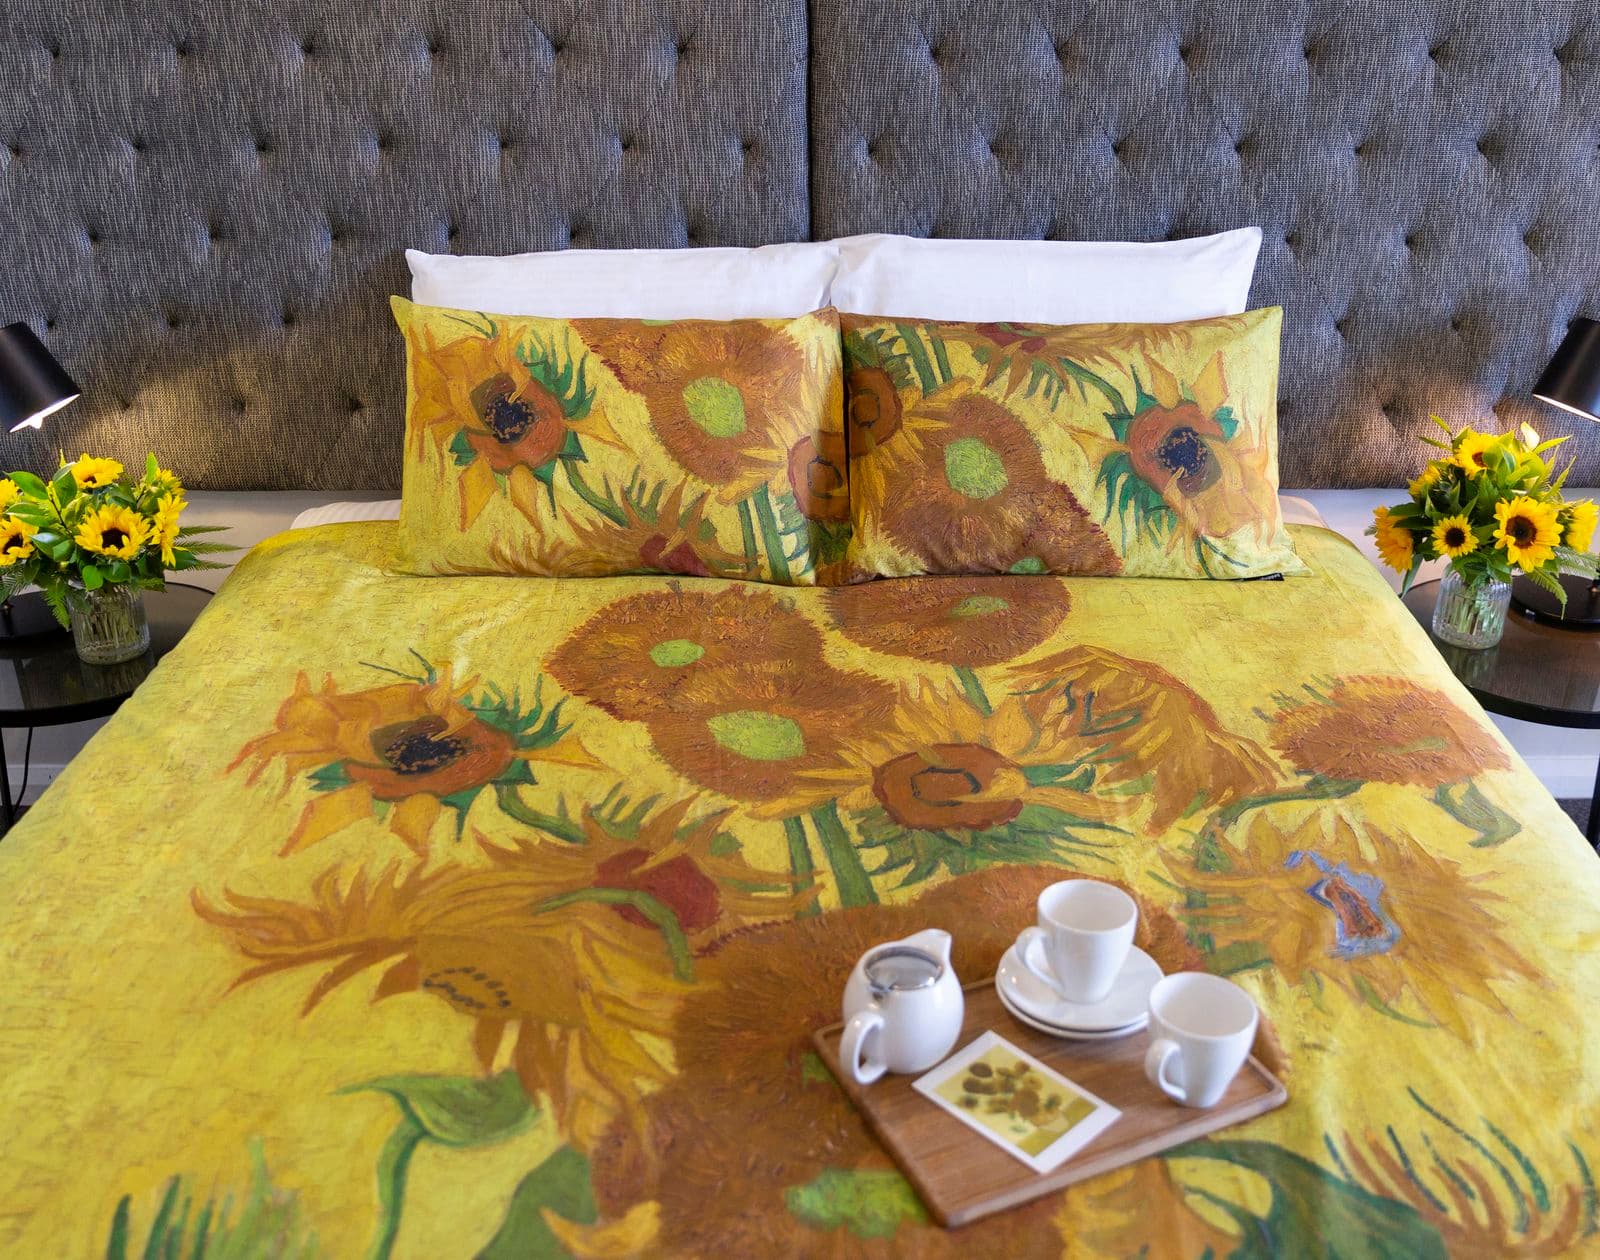 A photograph of a double bed made with sheets printed with Van Gogh's Sunflowers